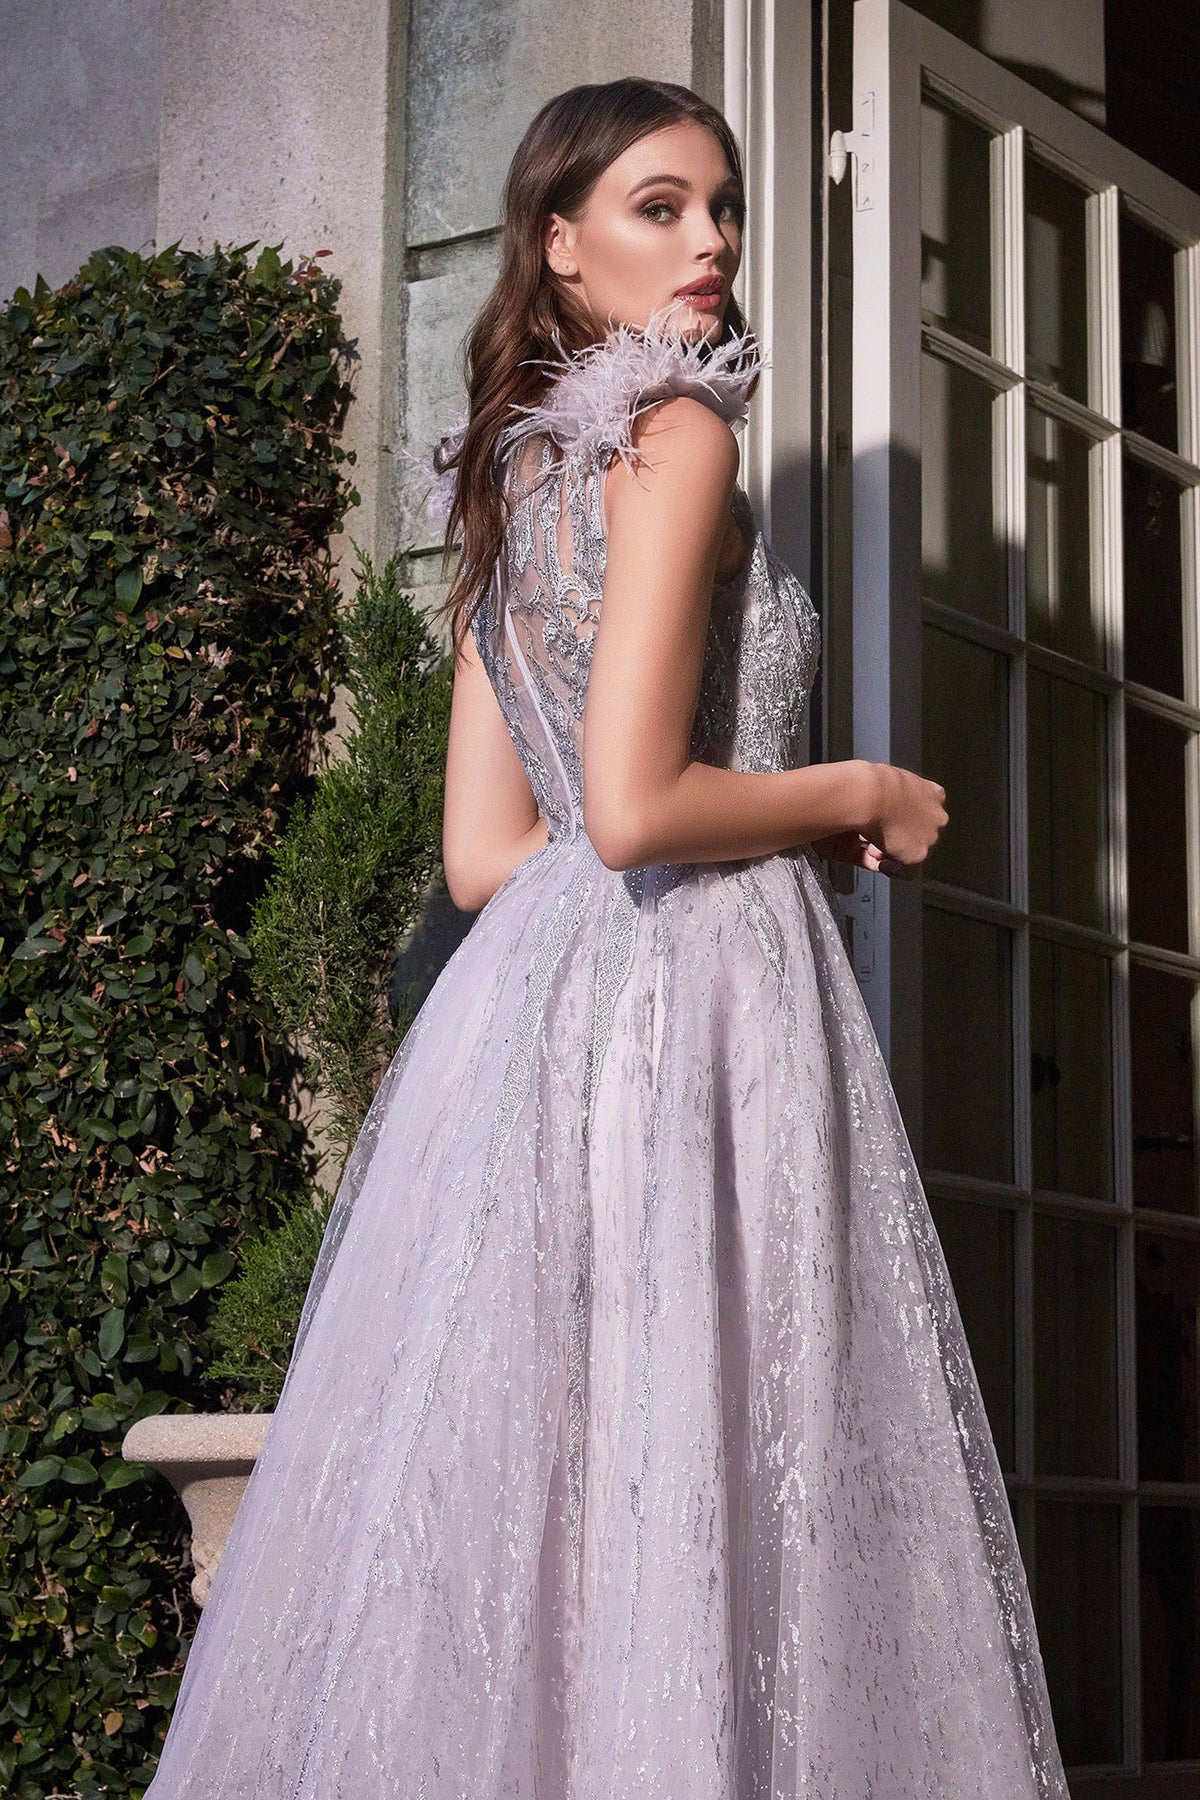 Glittery Ombre Long Dress with Sleeve Accents and Layered Skirt #CDB704 - NORMA REED